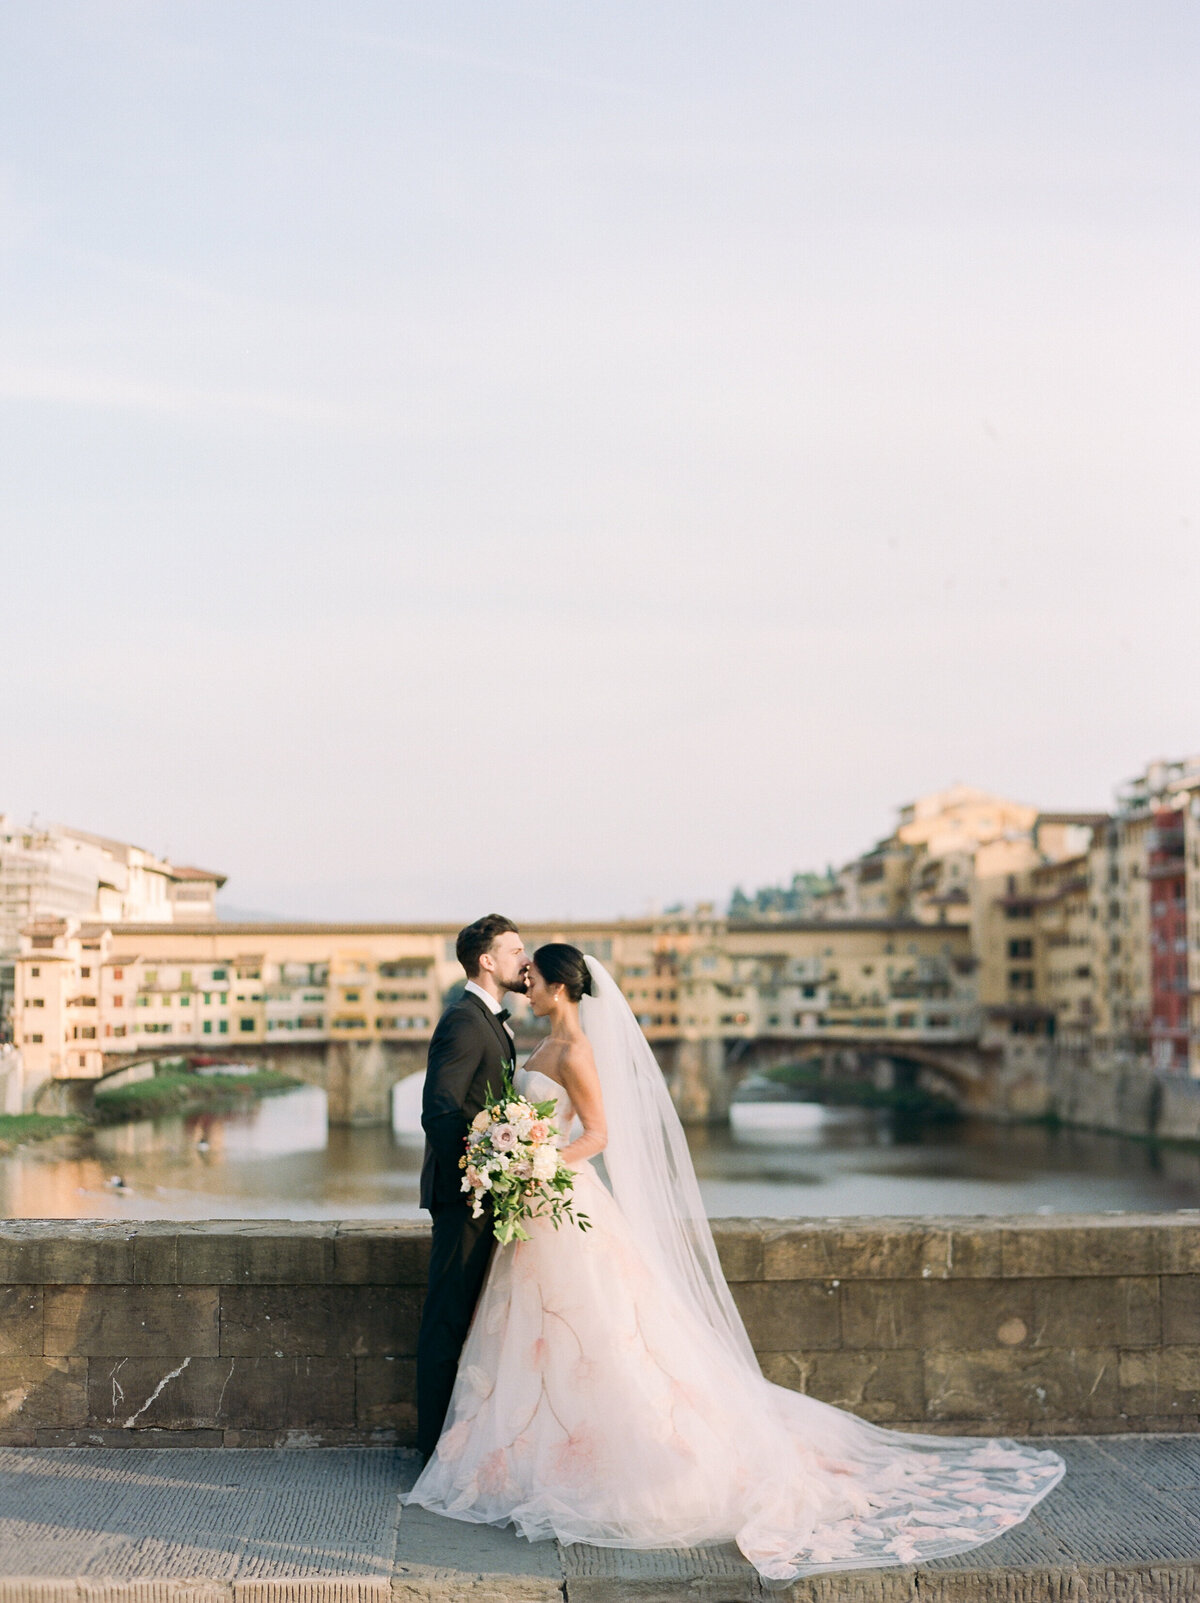 a groom kissing his bride on a bridge in florence italy during sunset